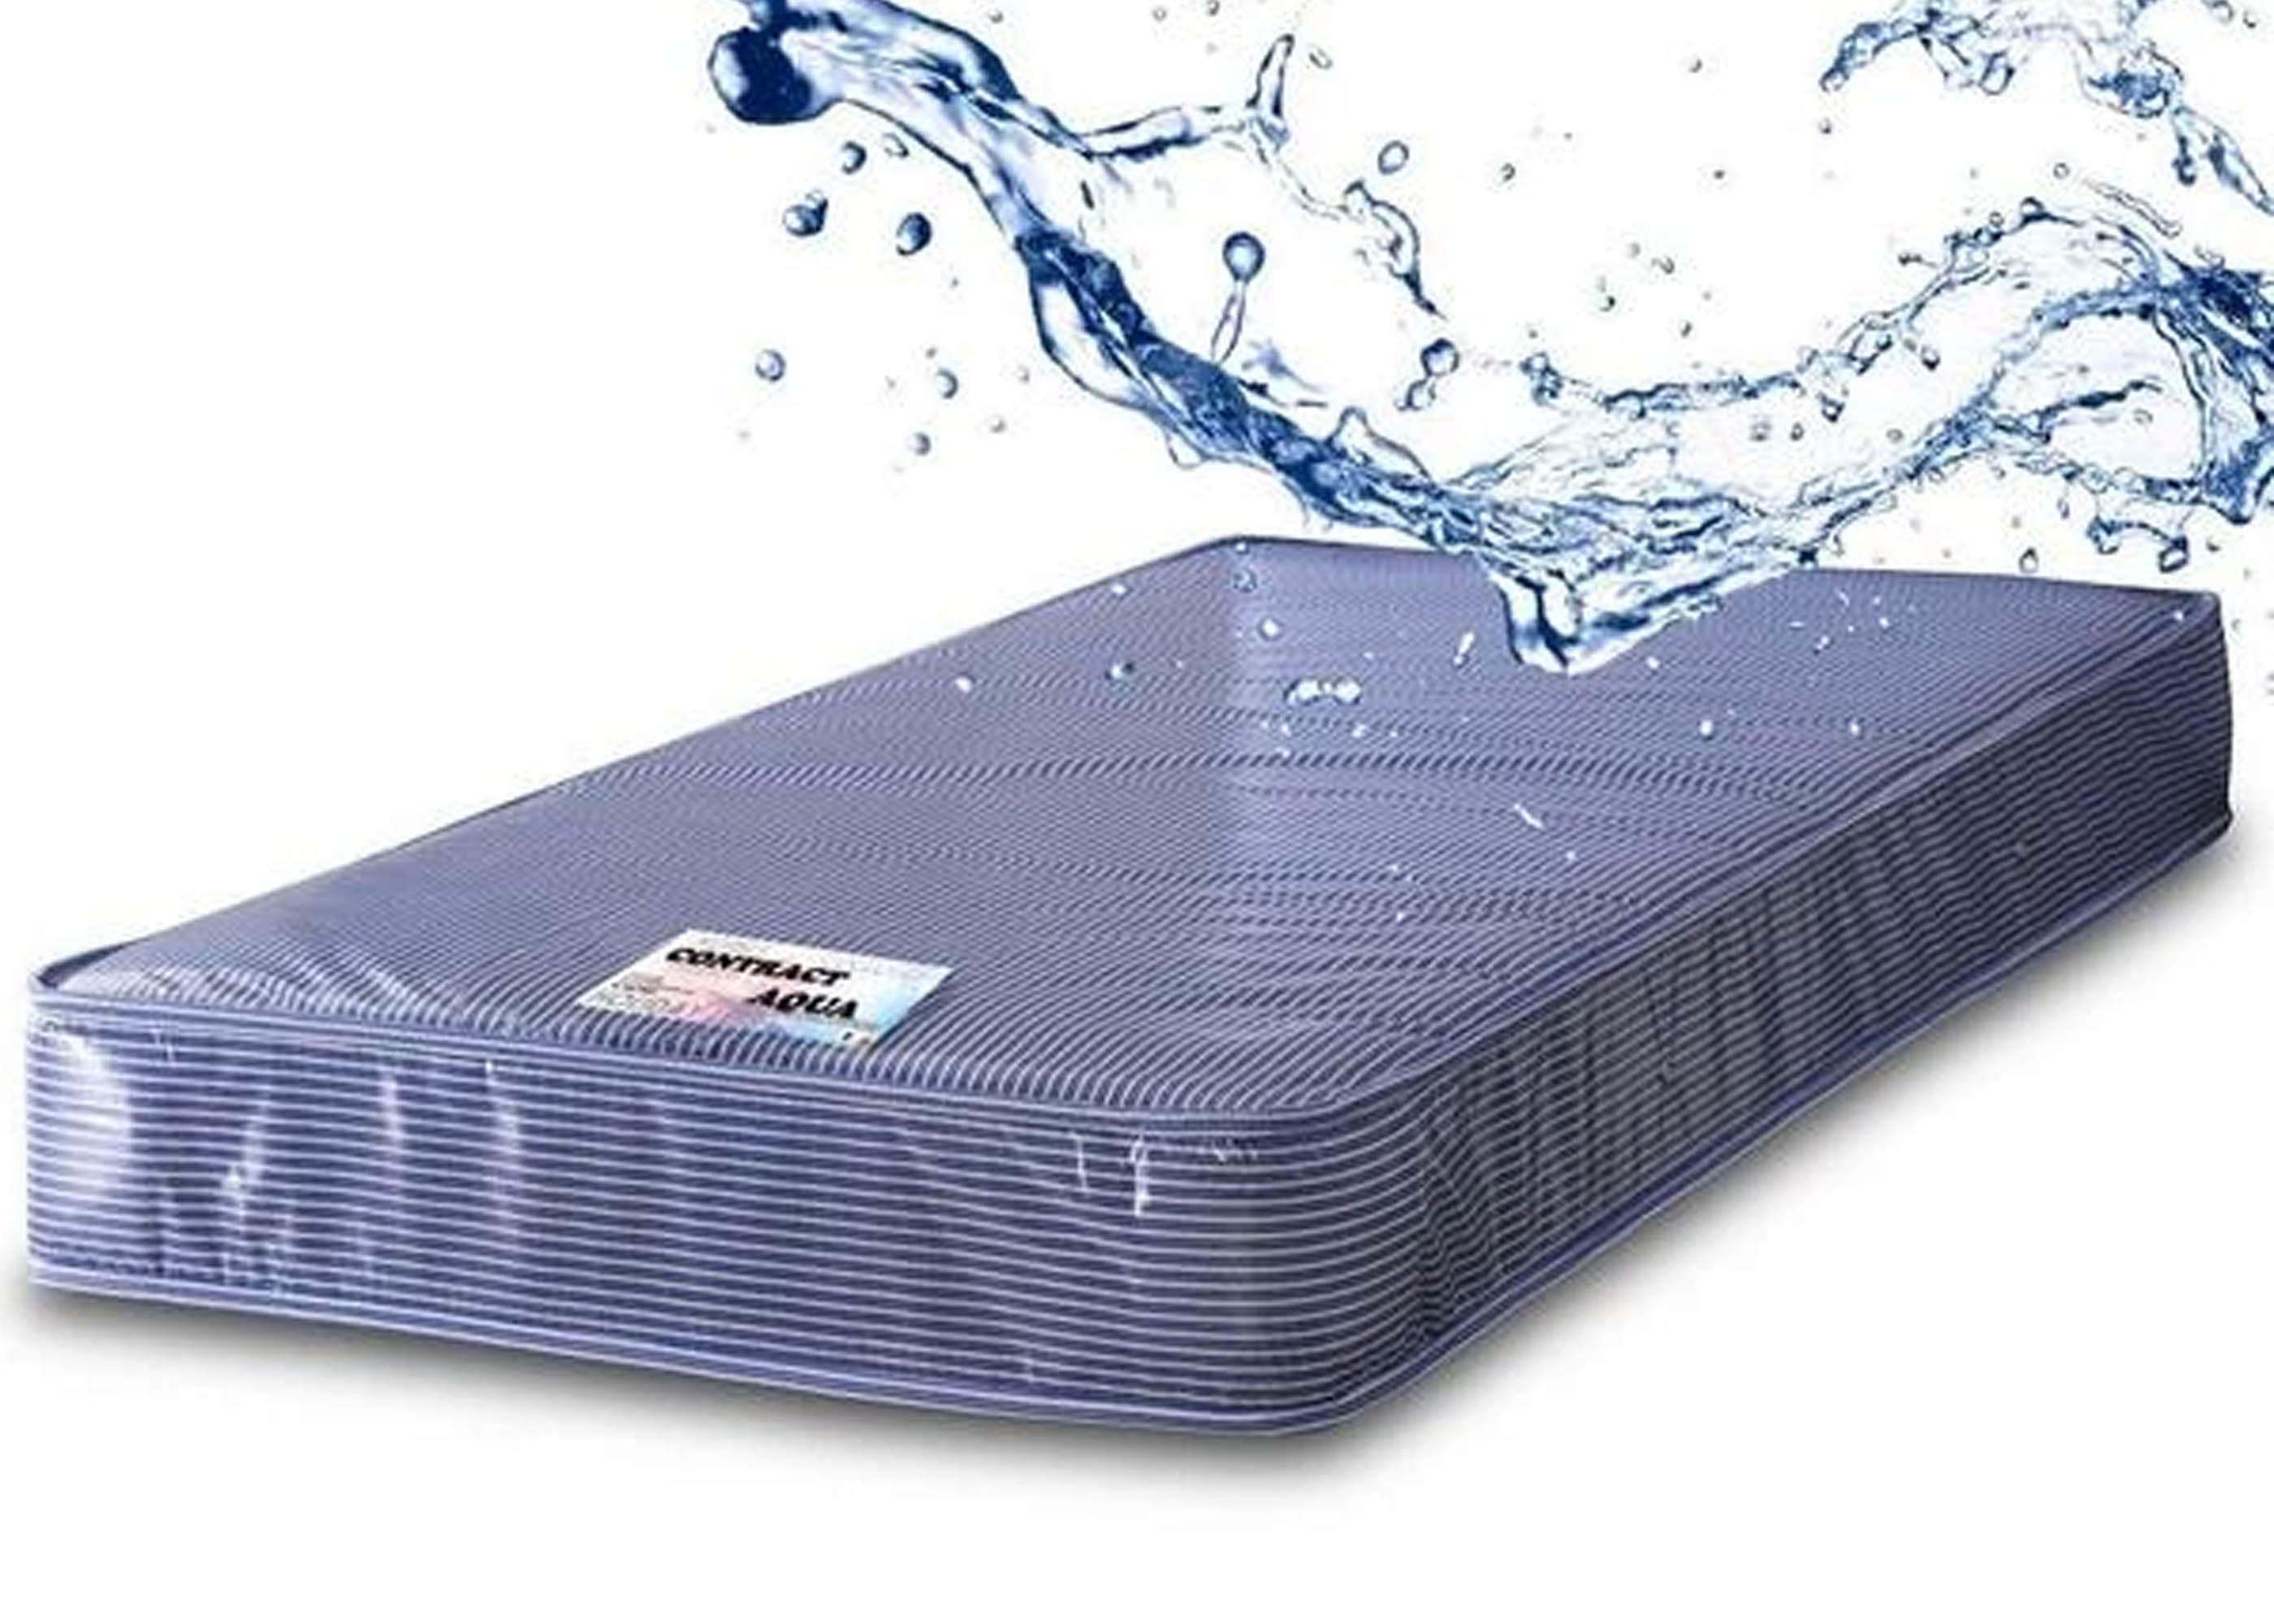 Contract Waterproof Care Home Incontinence Mattress Reinforced Beds